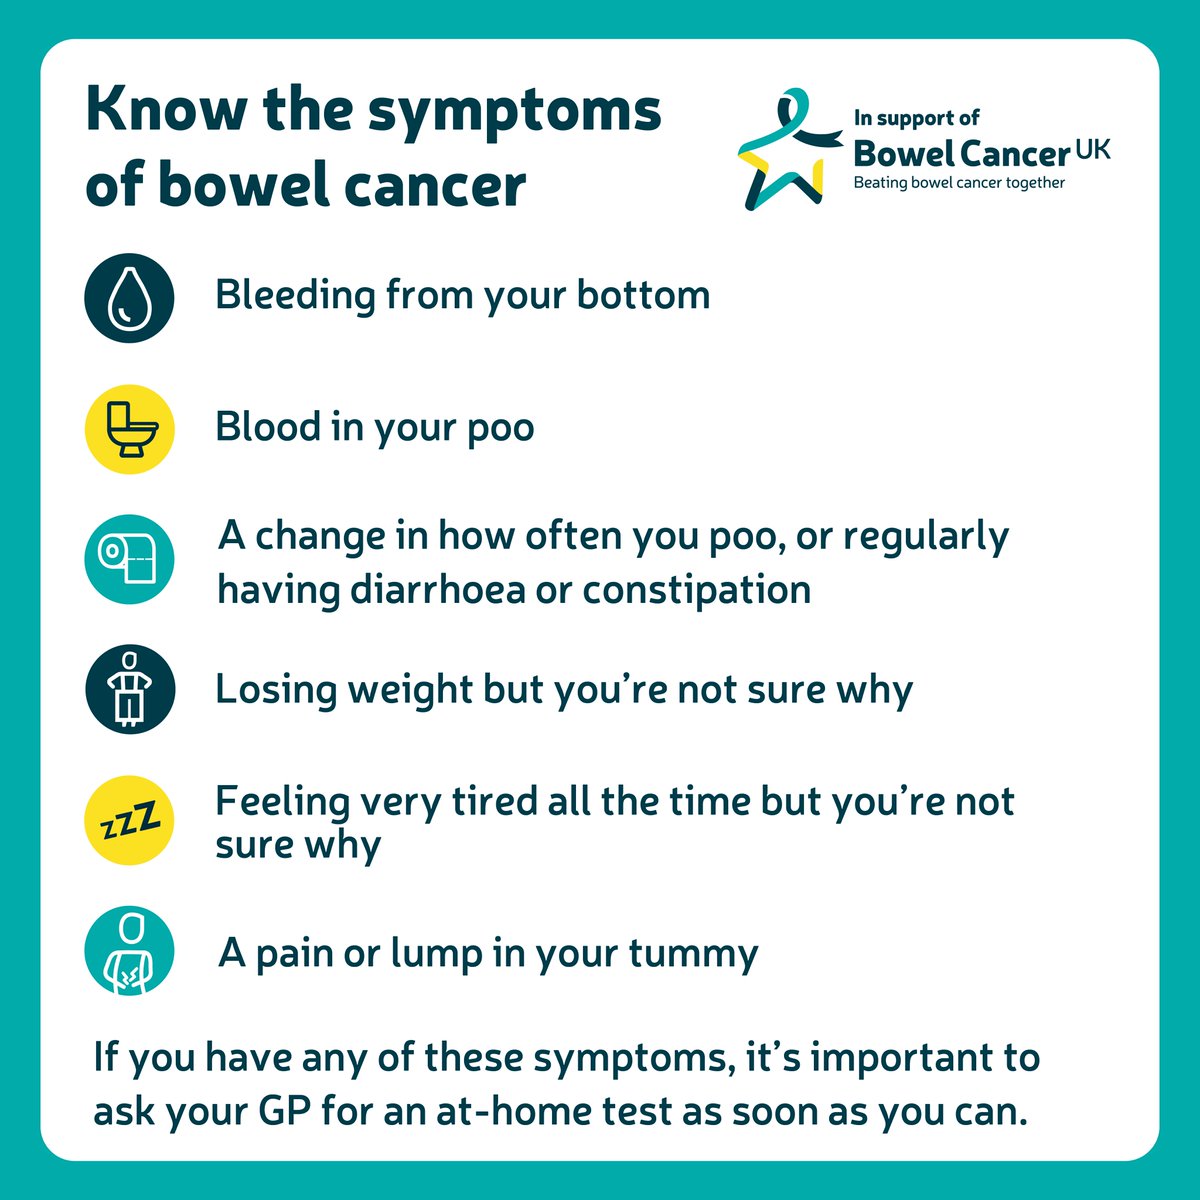 April is #BowelCancerAwarenessMonth & @bowelcanceruk want you to know this #OneThing – the earlier bowel cancer is spotted, the more treatable it’s likely to be. Find out more: bit.ly/4al7V34 @HealthierNWL @SWLNHS